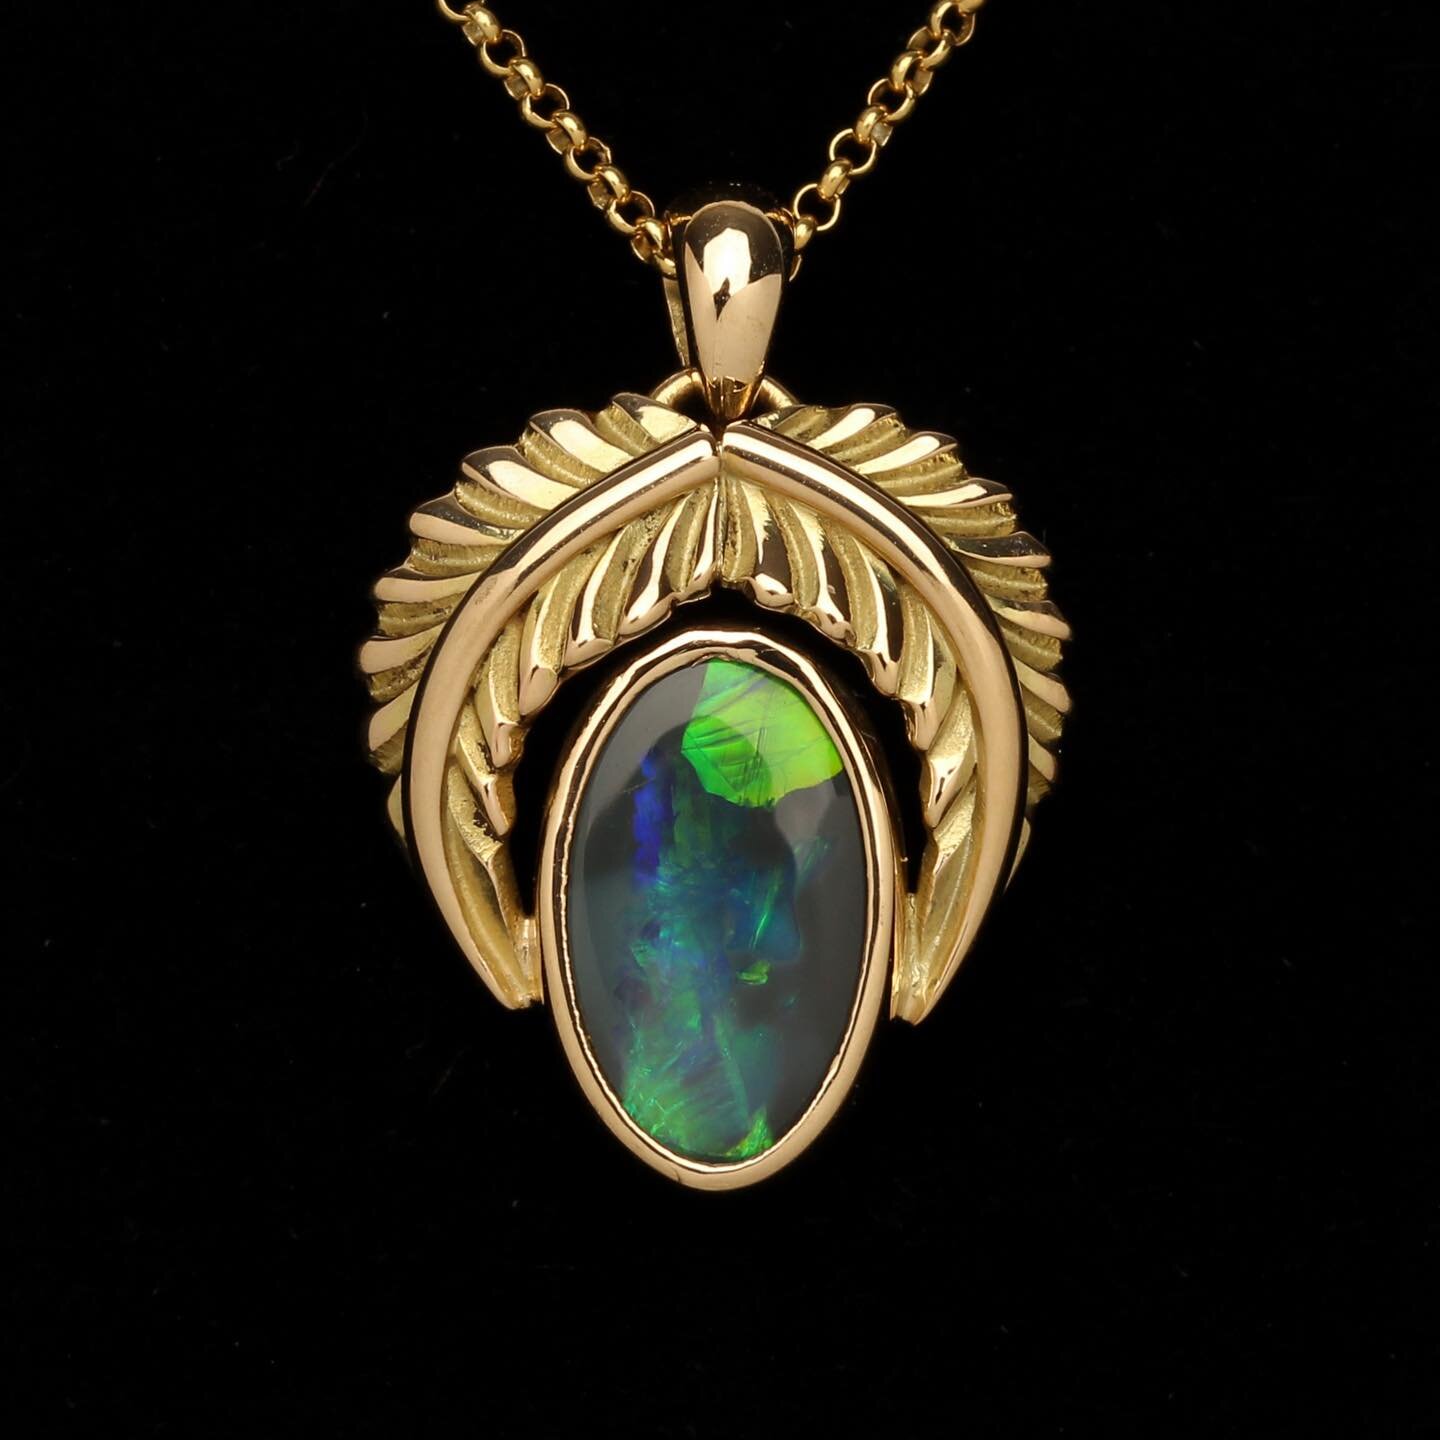 &bull;Lightning Ridge &bull; Black Opal&bull;

Lightning Ridge refers to the outback town of Australia where these opals were mined. The mine is known to produce some of the worlds most beautiful and valuable opals. The opals discovered here started 